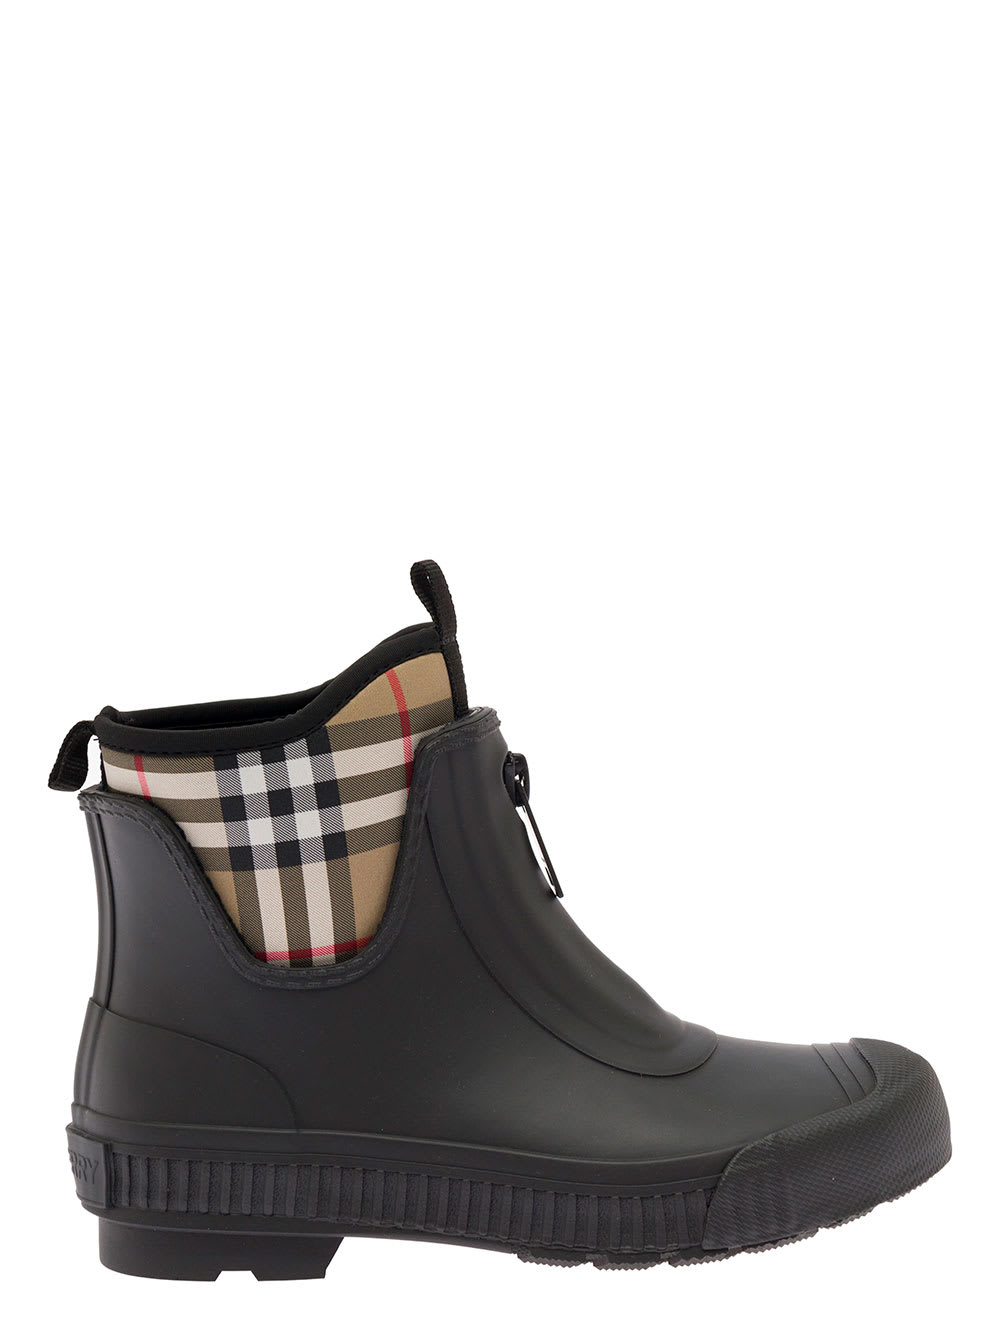 Burberry Womans Black Rubber Boots With Vintage Check Inserts